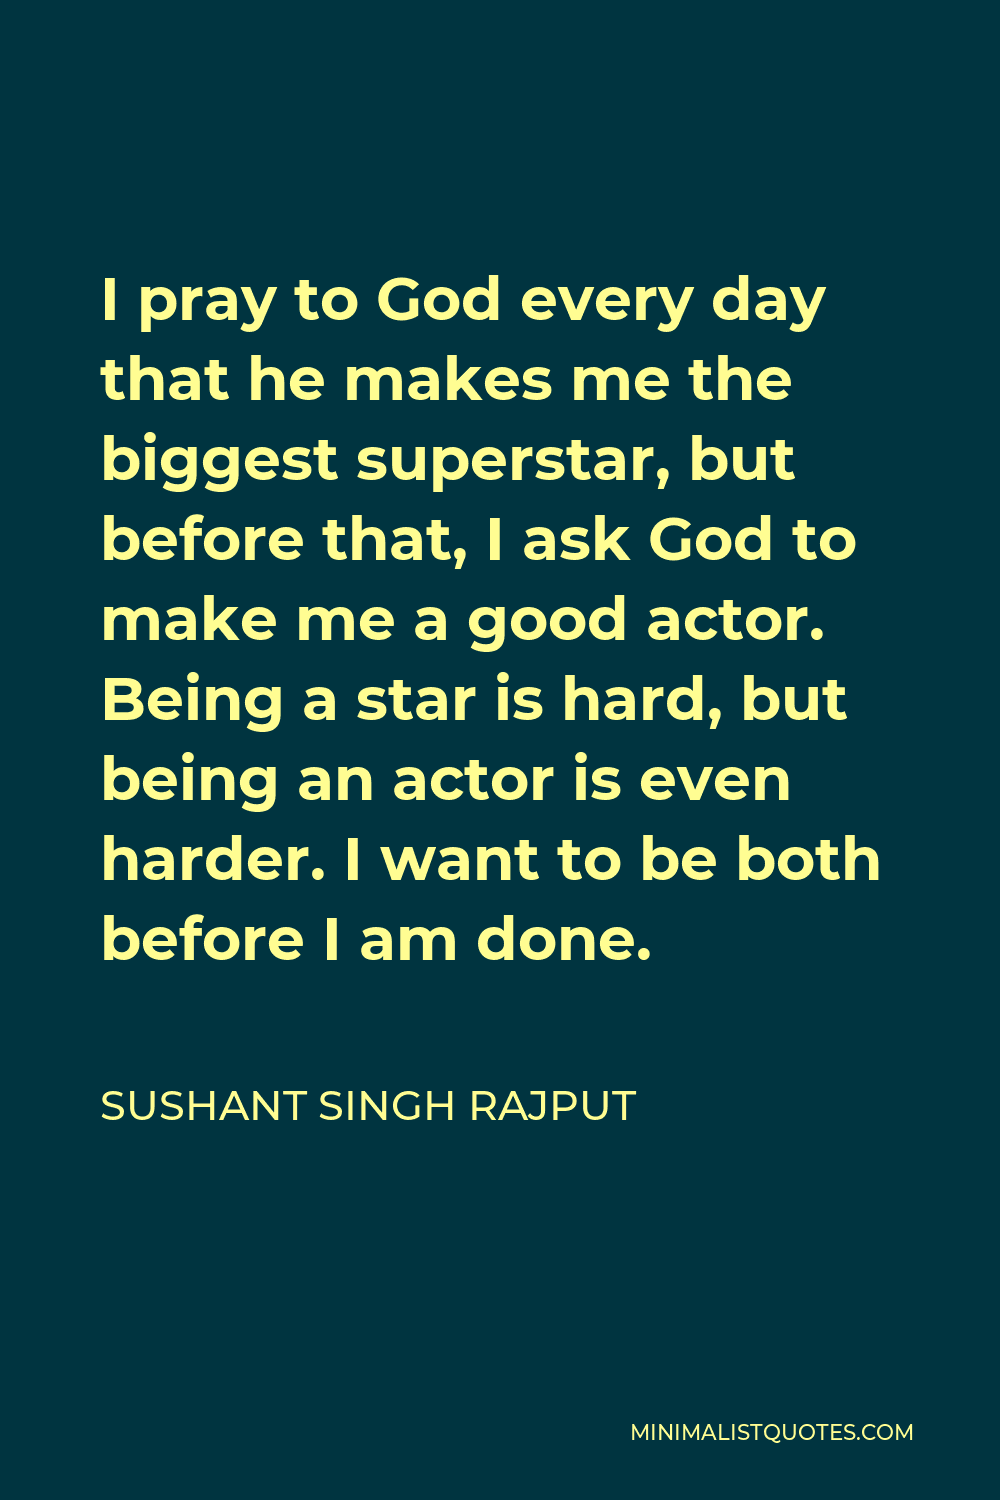 Sushant Singh Rajput Quote - I pray to God every day that he makes me the biggest superstar, but before that, I ask God to make me a good actor. Being a star is hard, but being an actor is even harder. I want to be both before I am done.